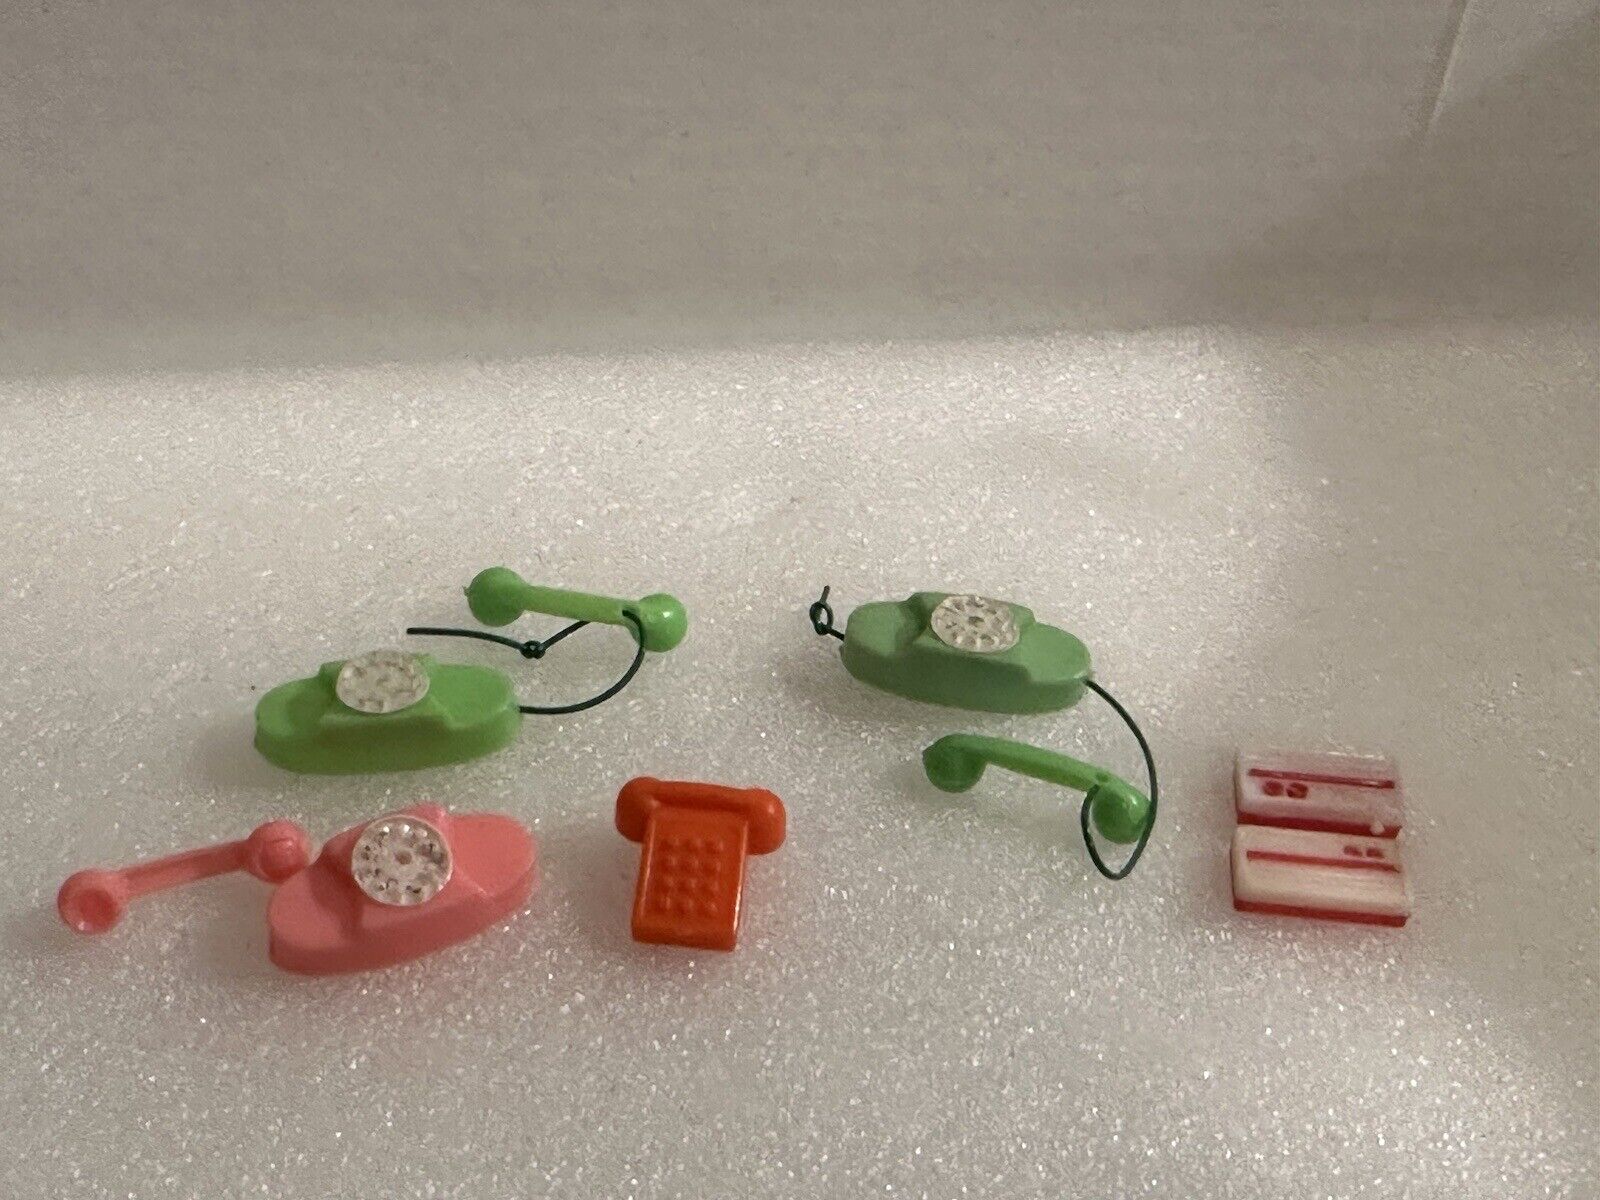 Vintage Barbie Telephone And Radio Lot Of 6 Pieces Mattel 1960's-1970's